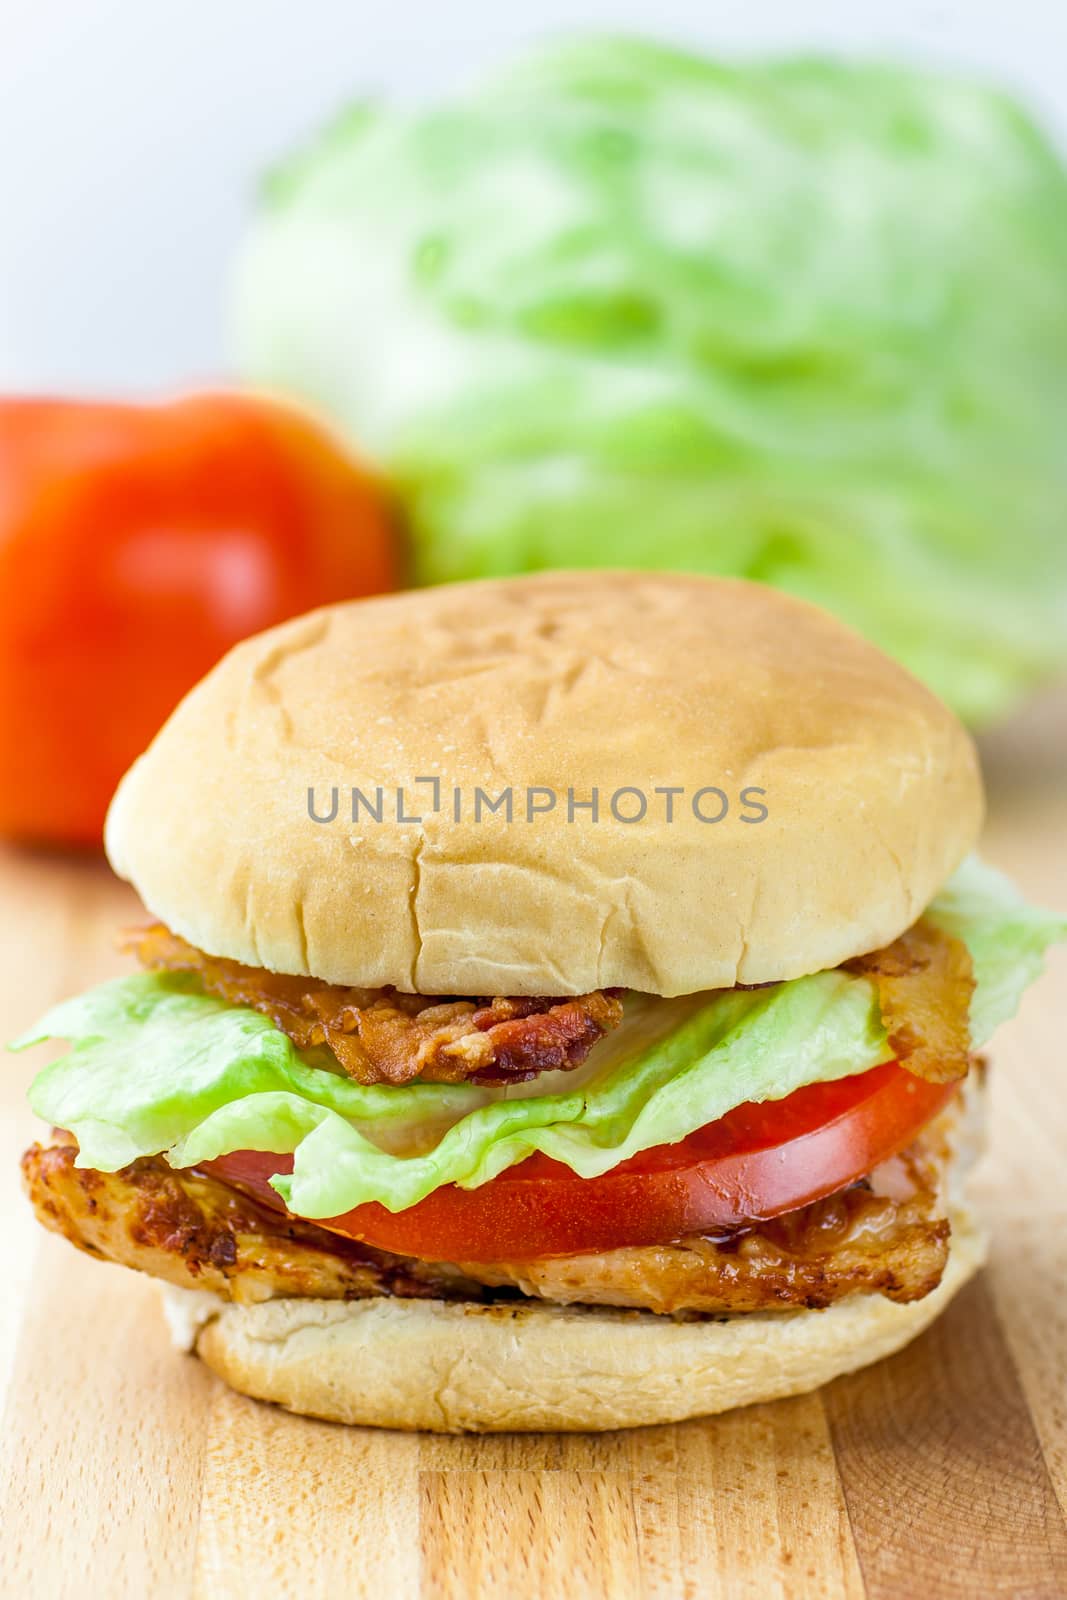 Grilled Chicken Sandwich by SouthernLightStudios